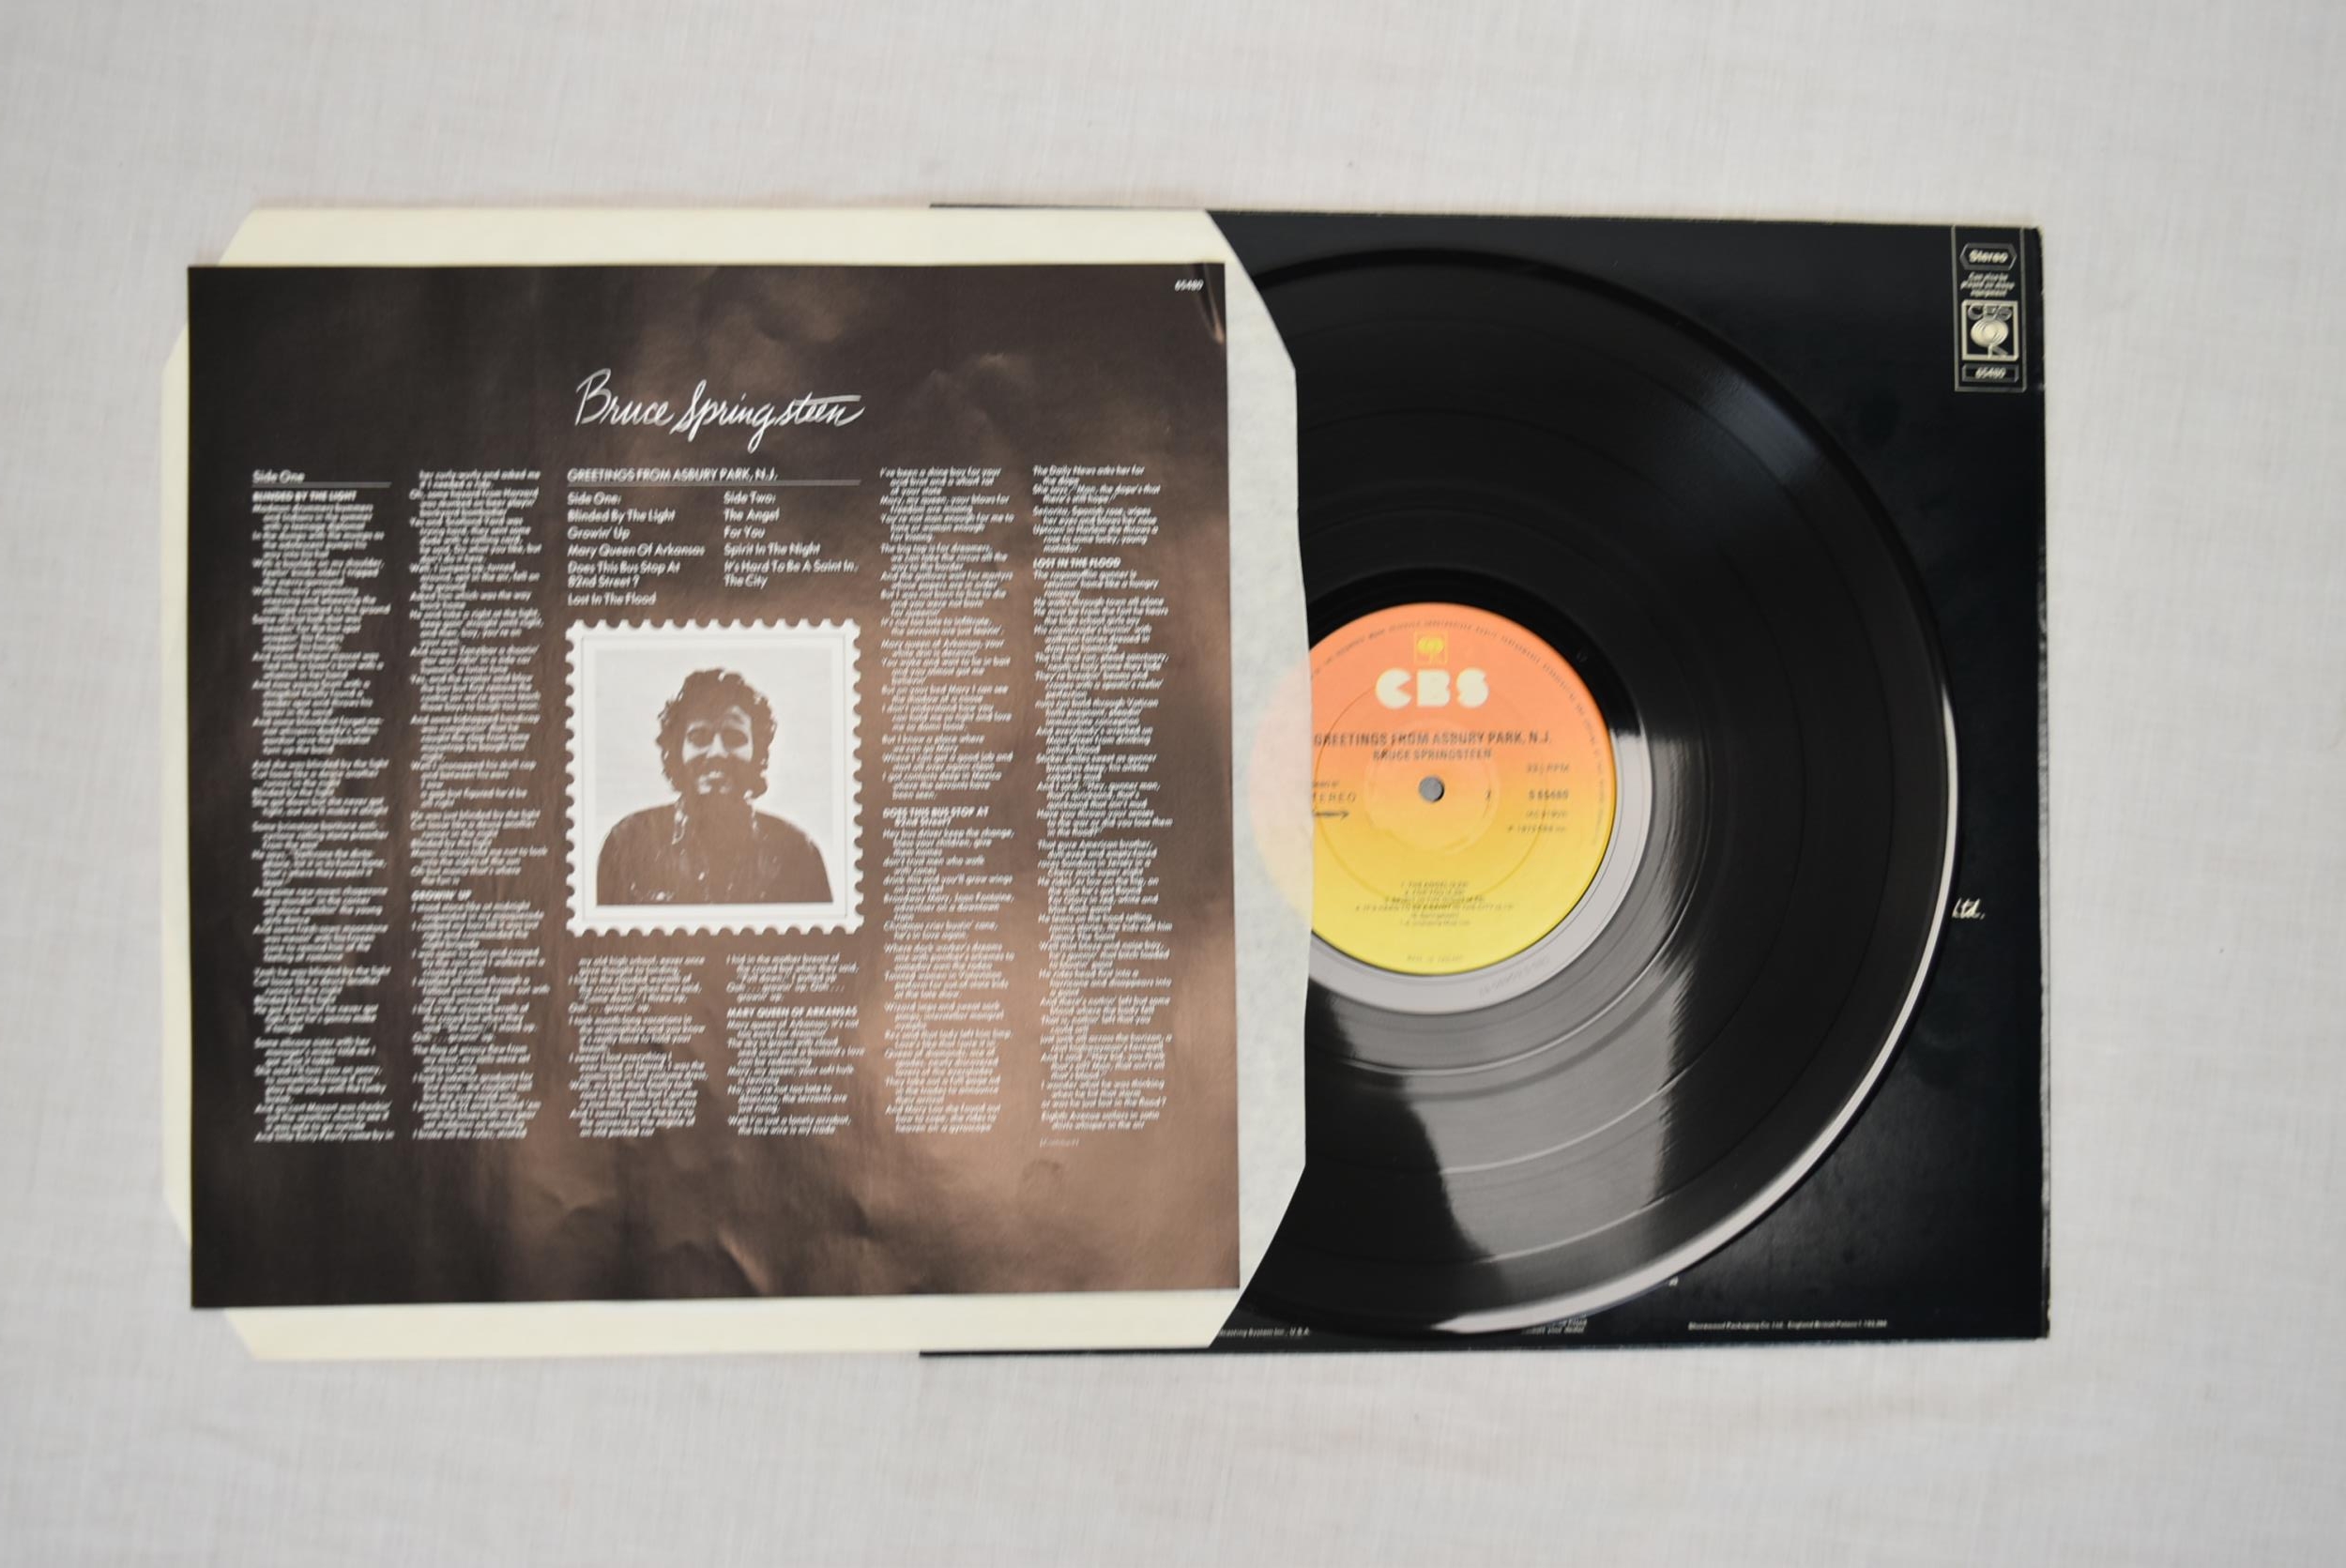 Records - Springsteen LP Box Set in VG condition. - Image 6 of 6